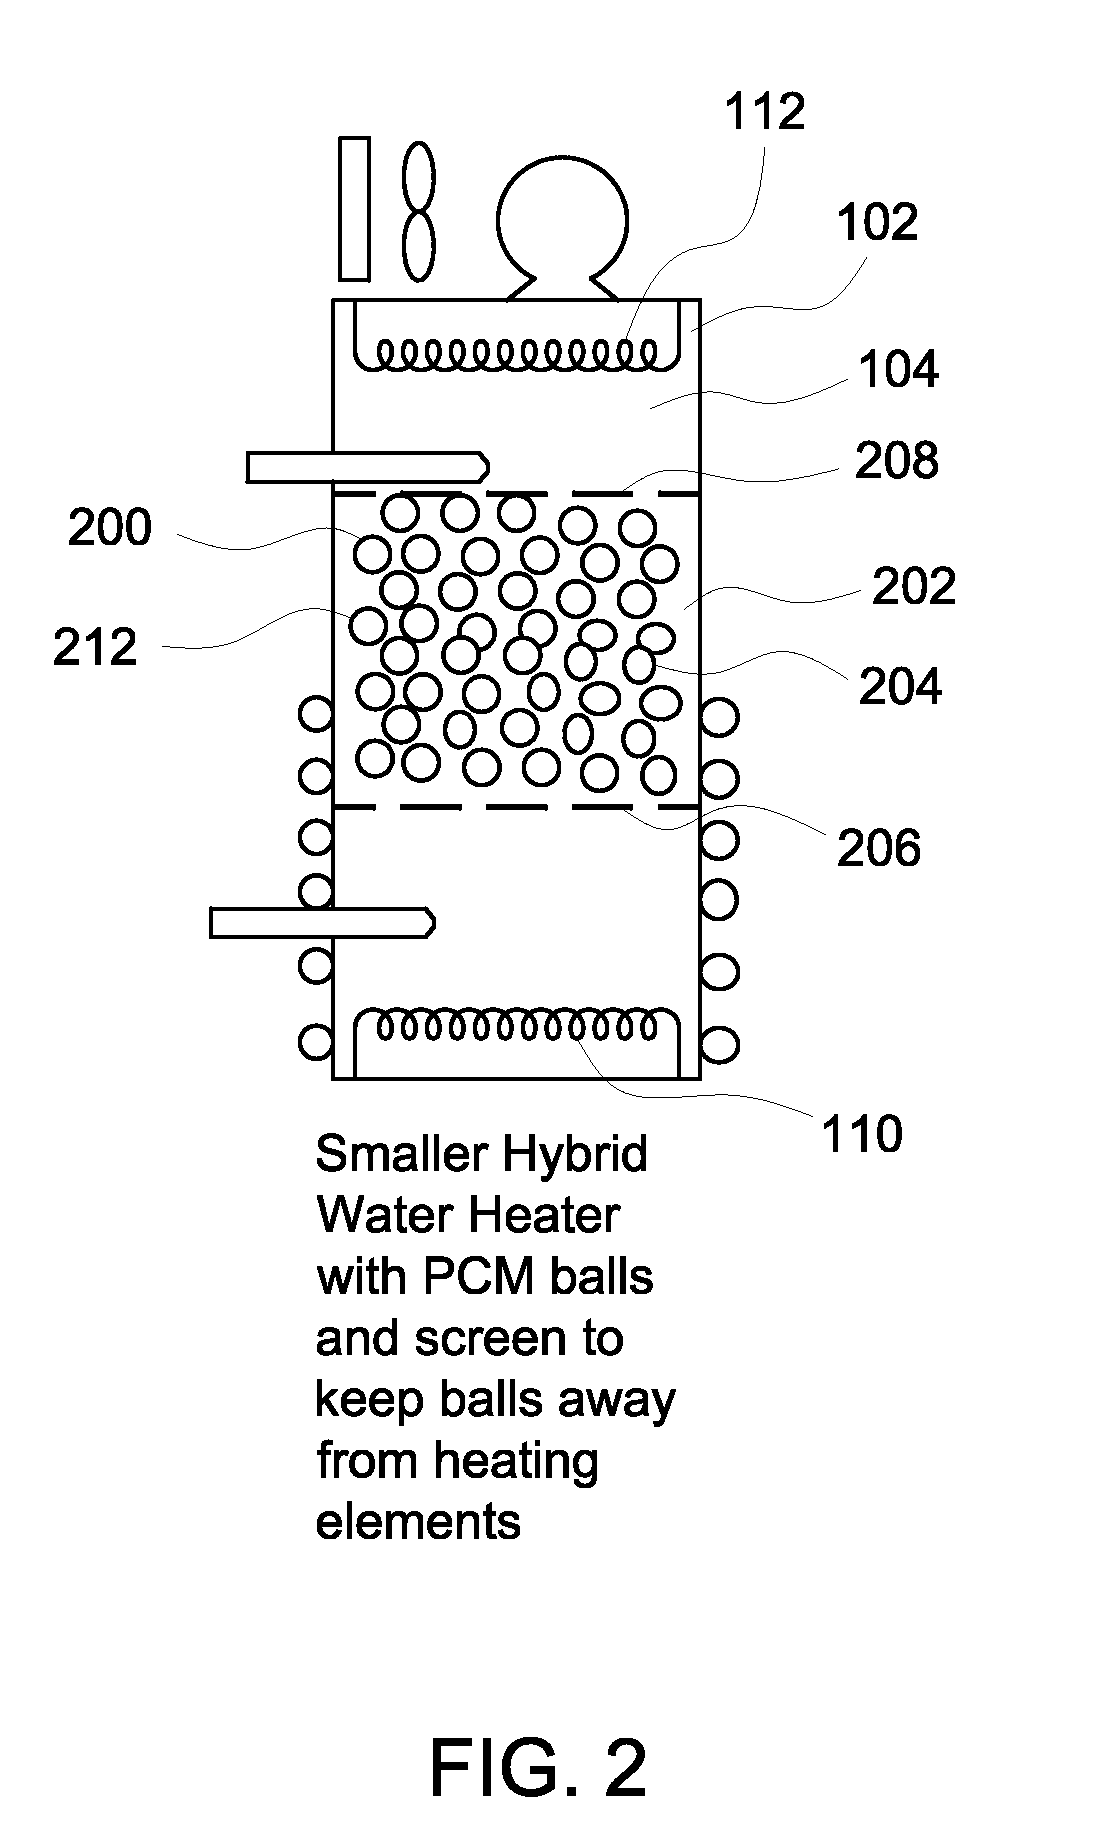 Water heater containing a phase change material